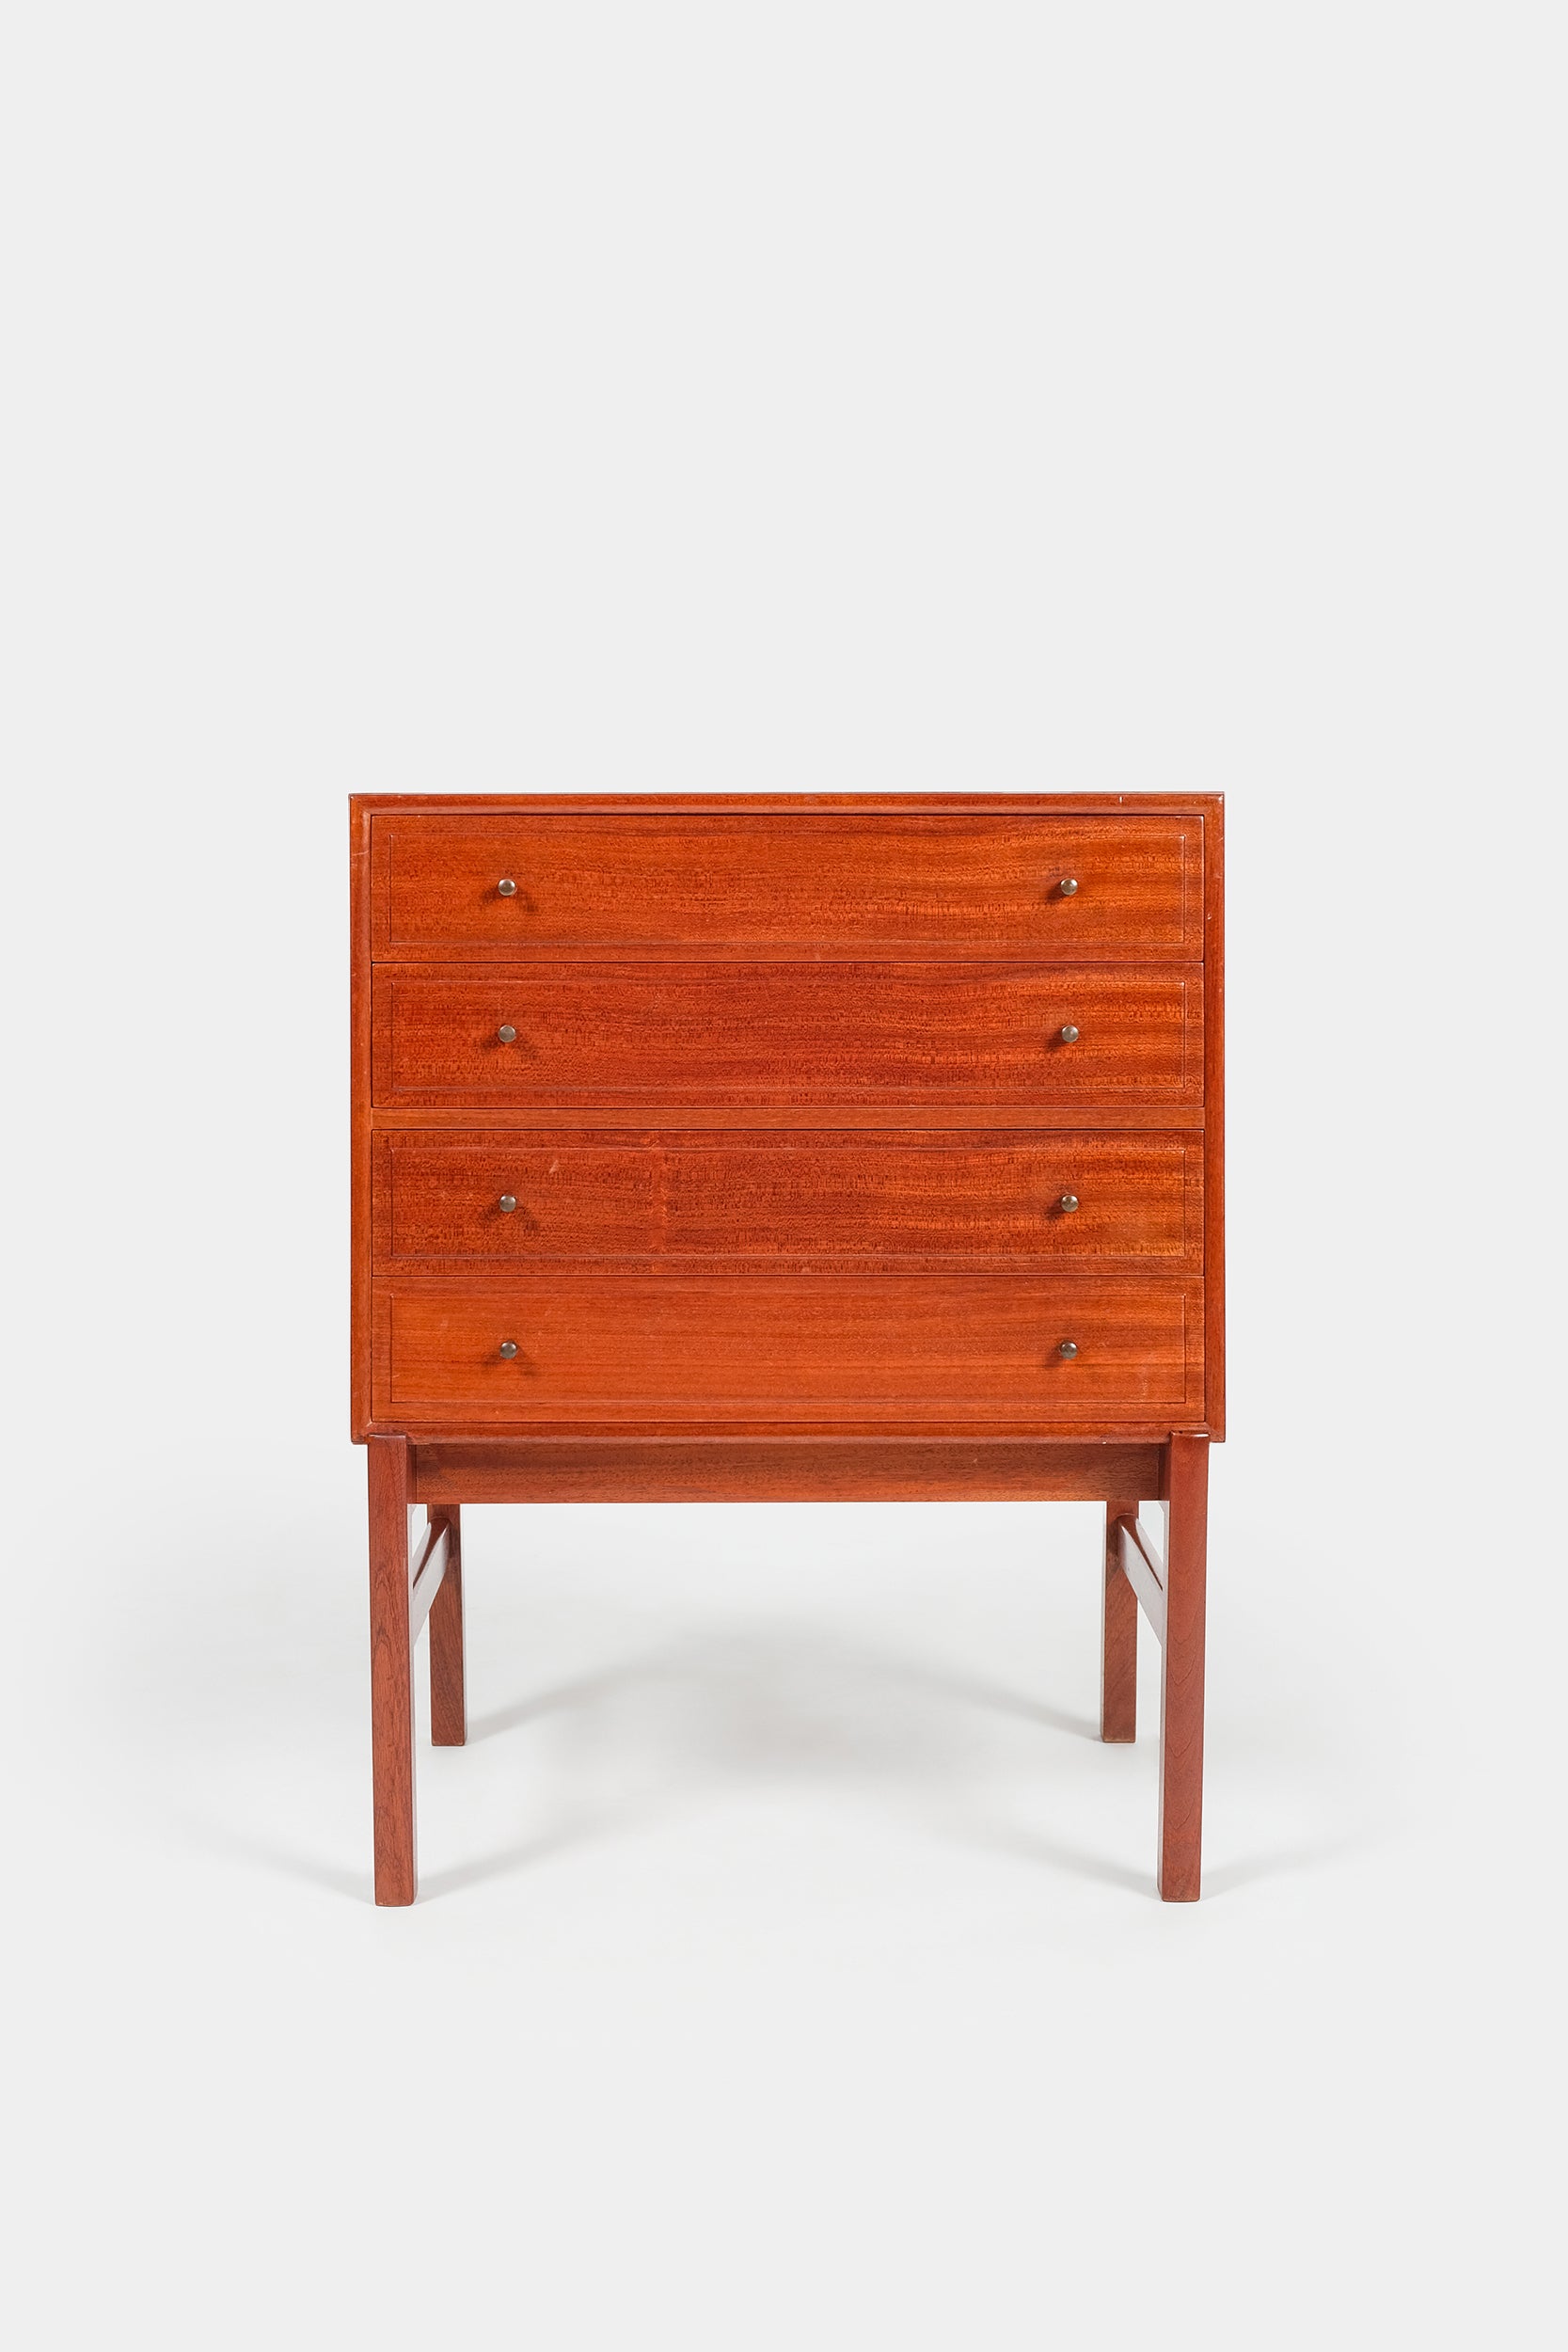 Ole Wanscher, Chest of Drawers with Mirror, A. J. Iversen, 1959